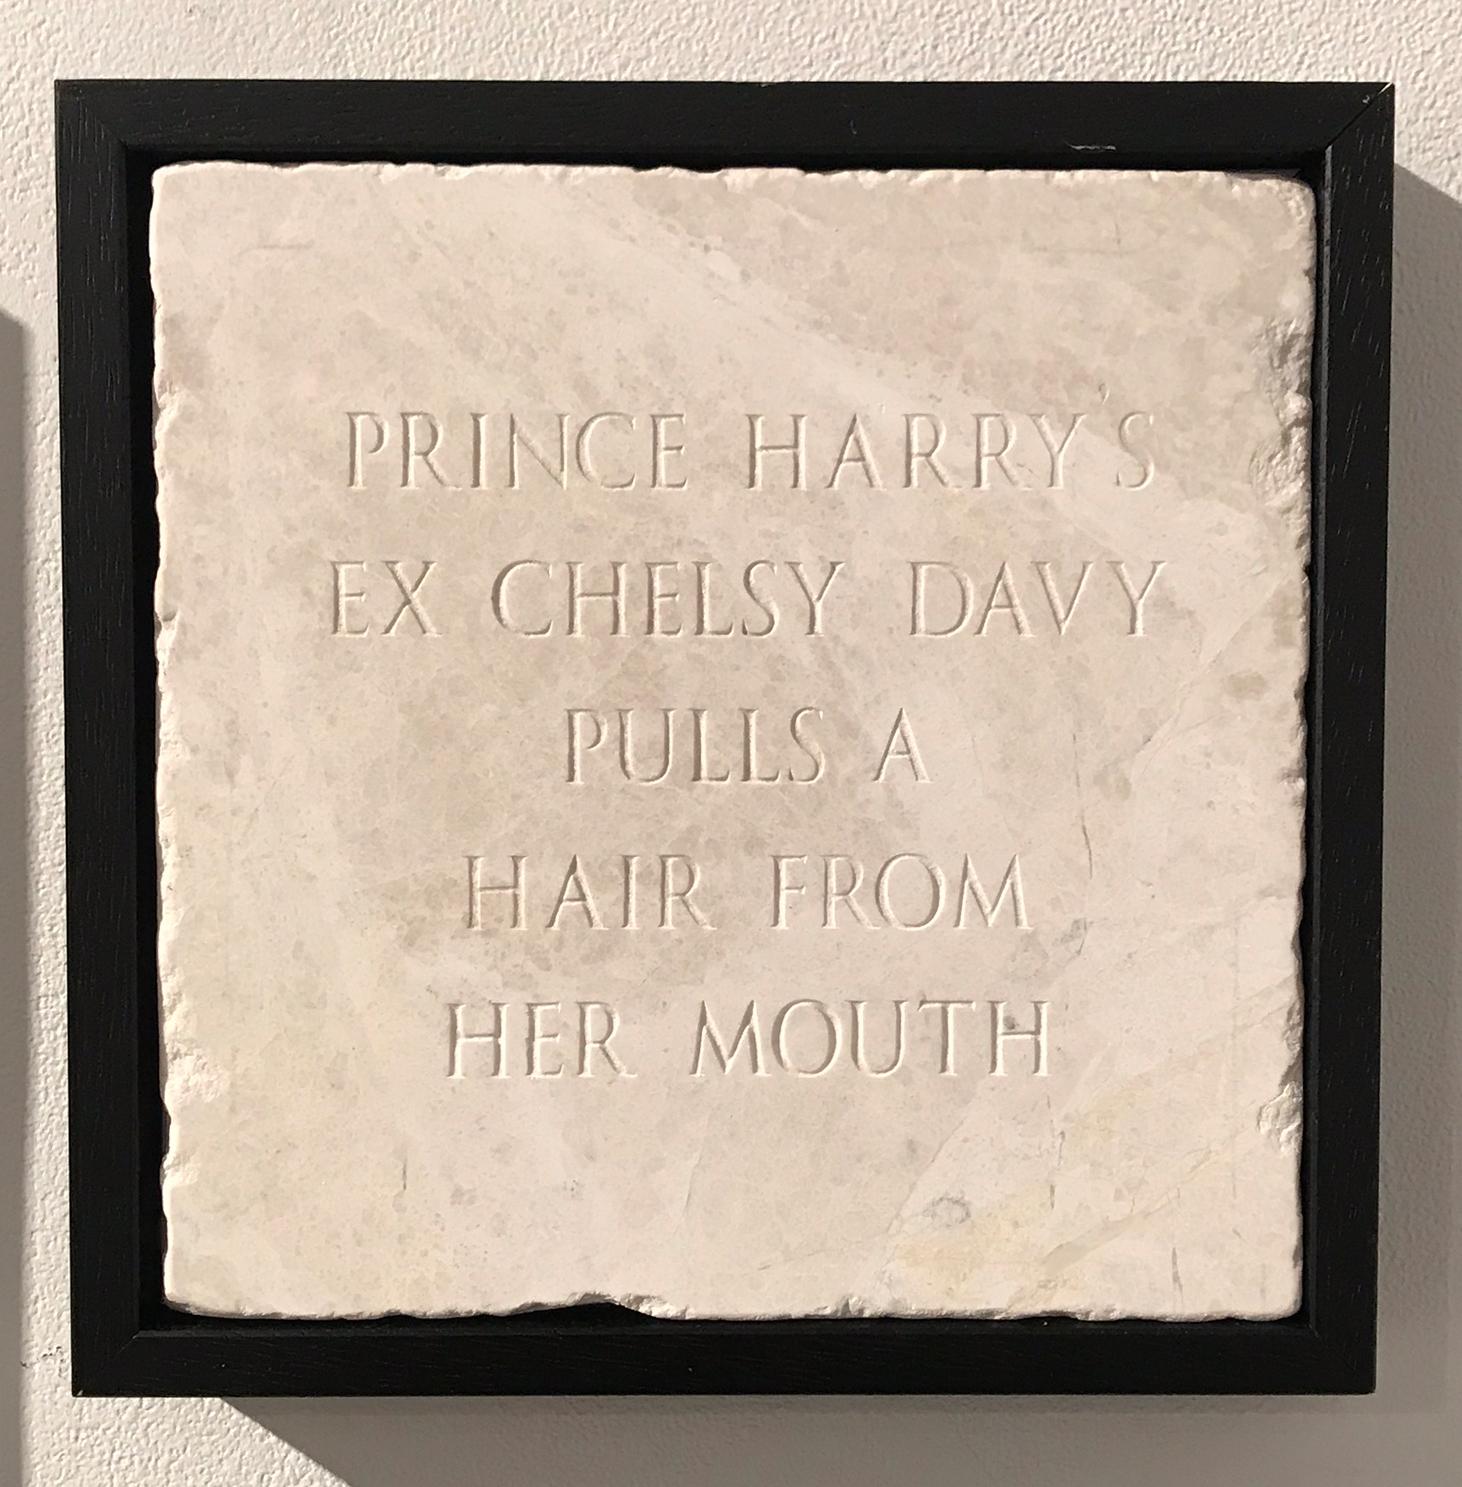 Sarah Maple Figurative Sculpture - Prince Harry's Ex Chelsy Davy Pulls Hair From Mouth, Sculpture, Marble, Engraved